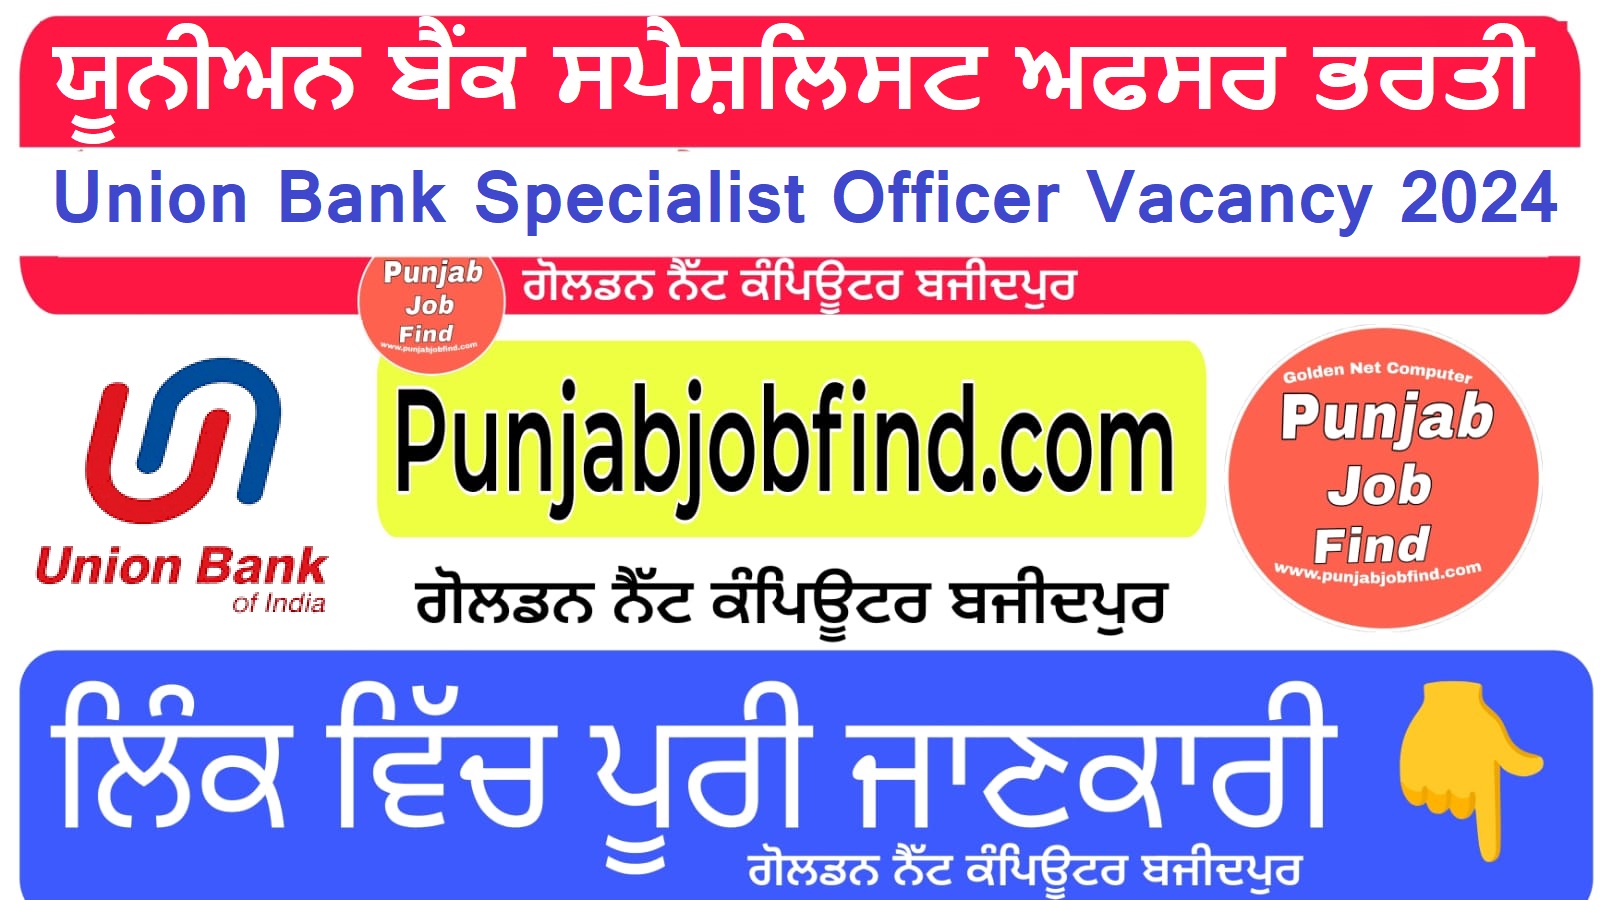 Union Bank Specialist Officer Vacancy 2024